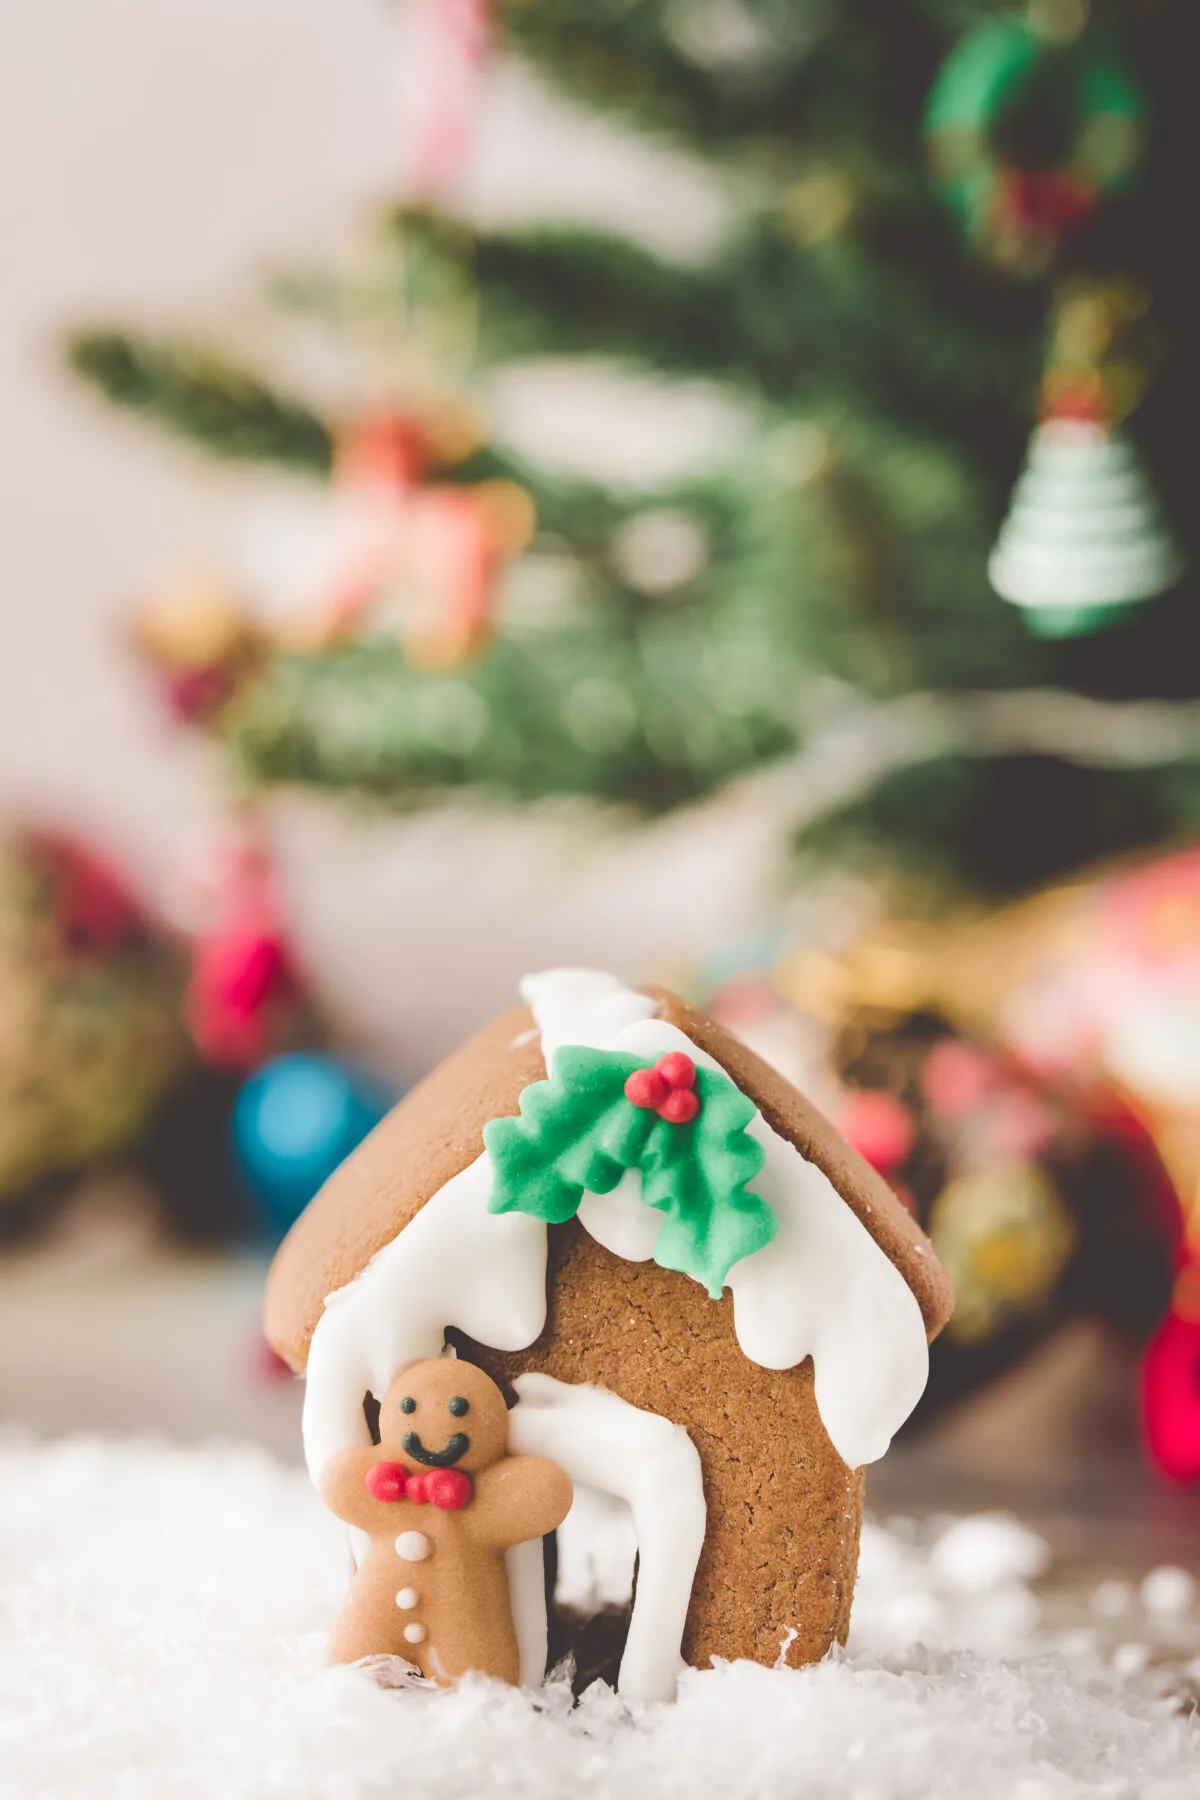 Make your own little gingerbread house mug toppers with this recipe. These mini gingerbread houses are adorable and festive holiday treats.